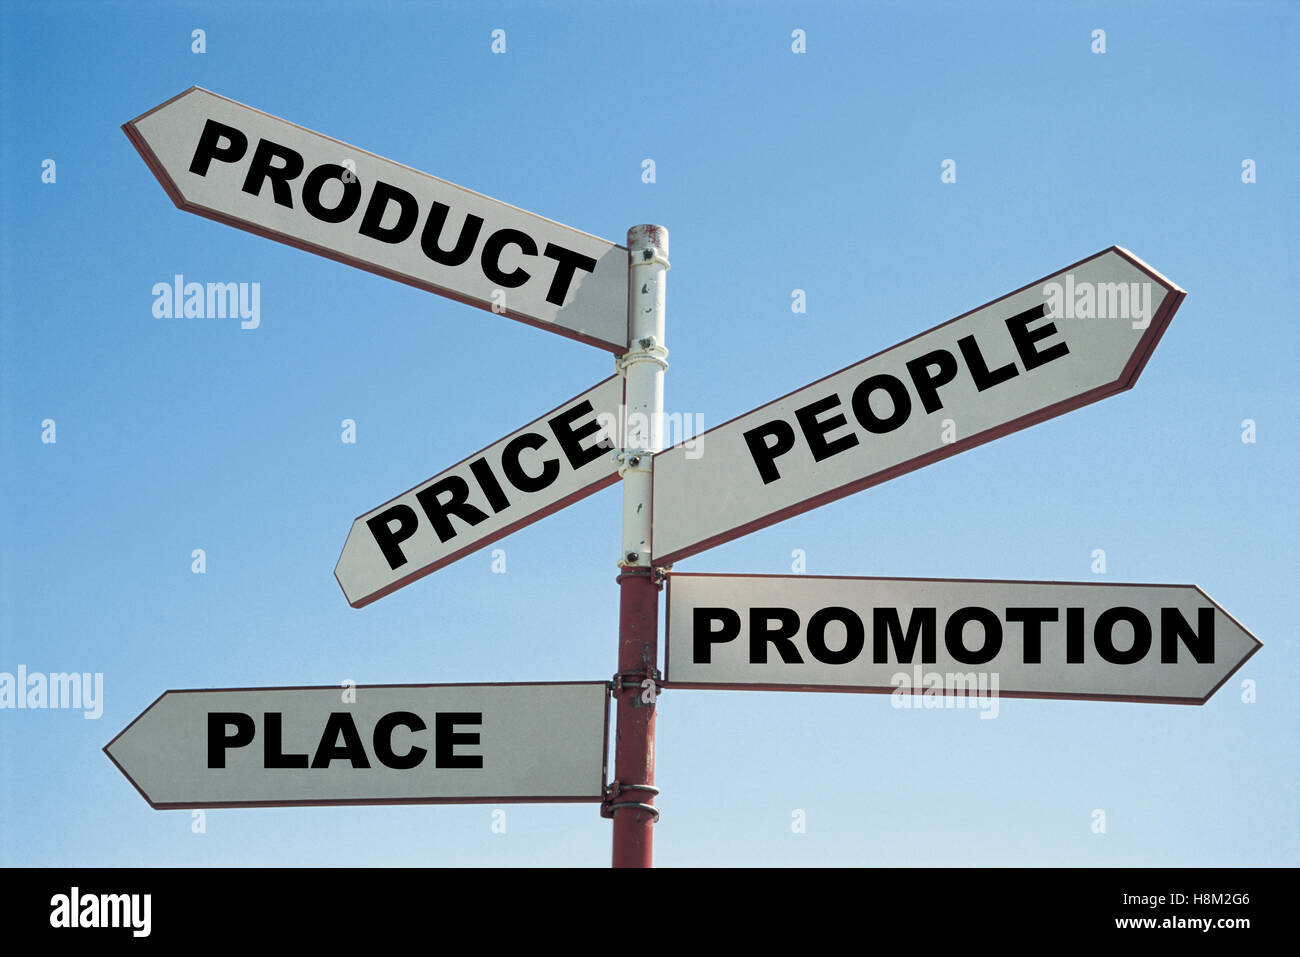 5 P'S Of Marketing on a sign post Stock Photo